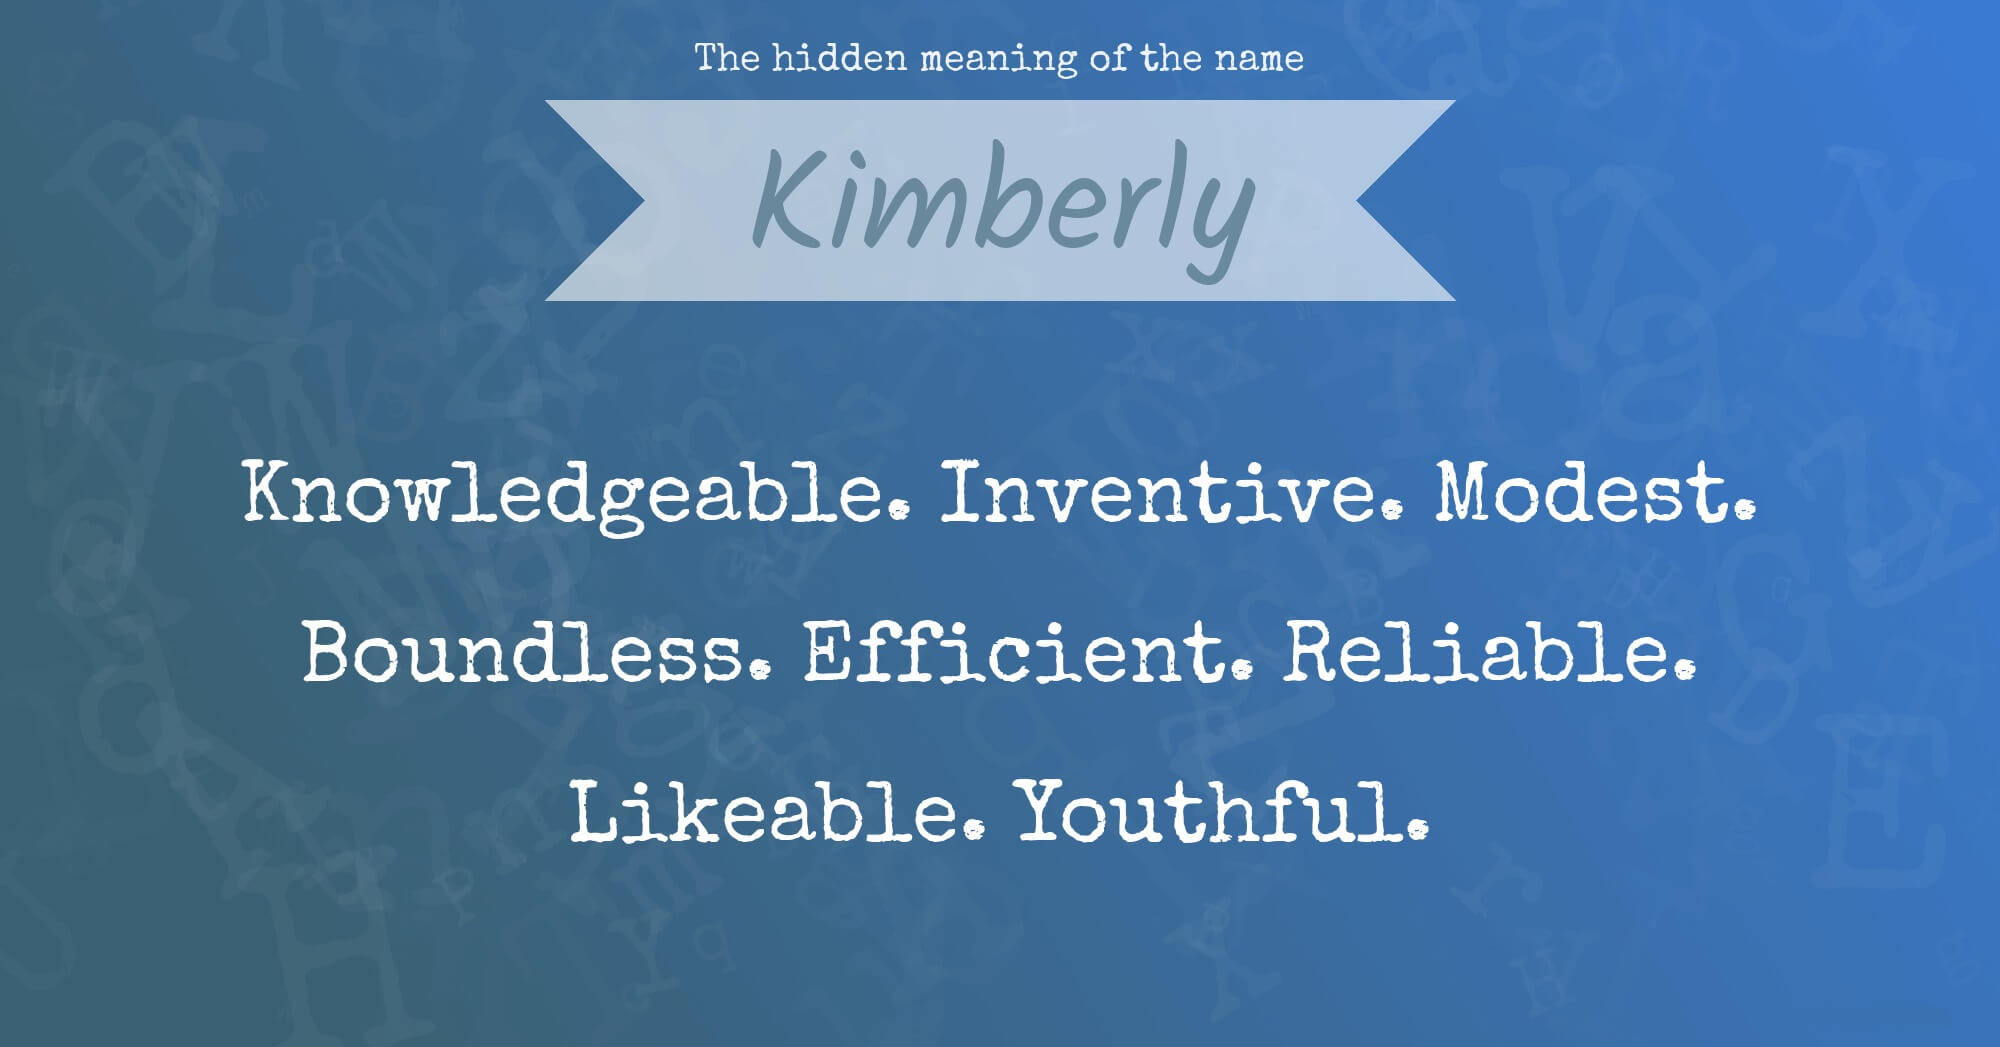 The Hidden Meaning Of The Name Kimberly